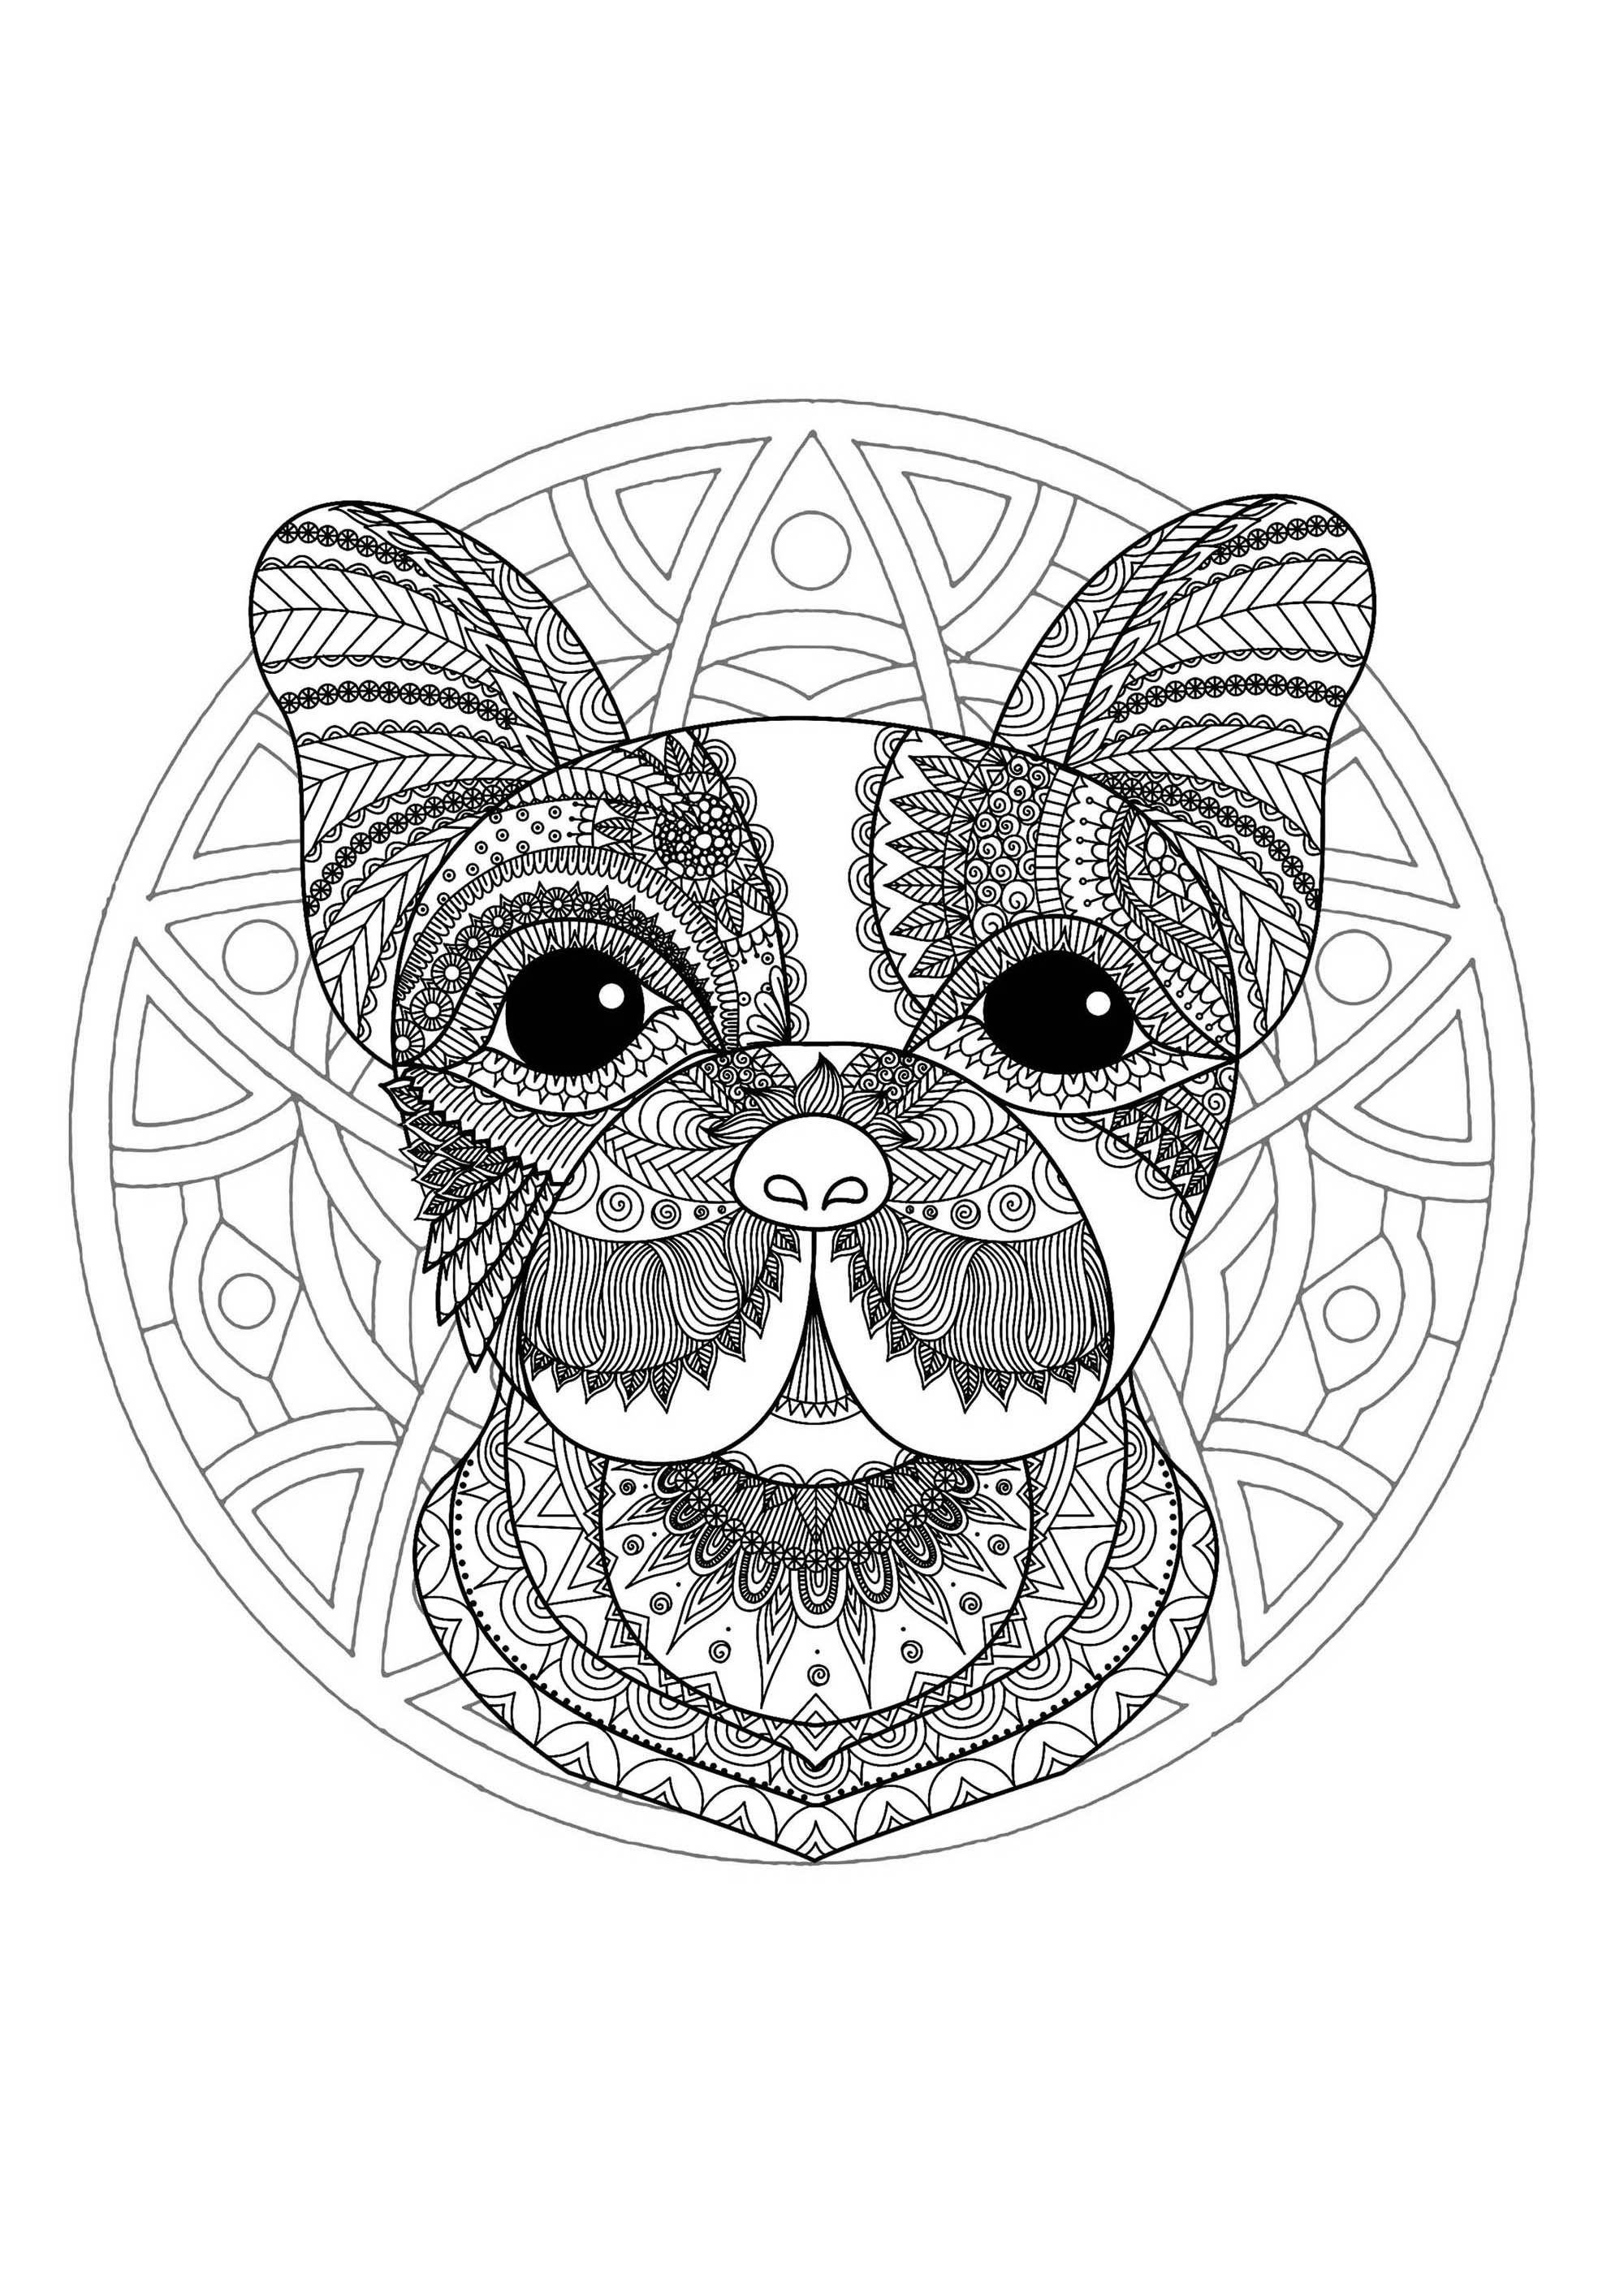 Coloring page with Dog head and simple Mandala in background